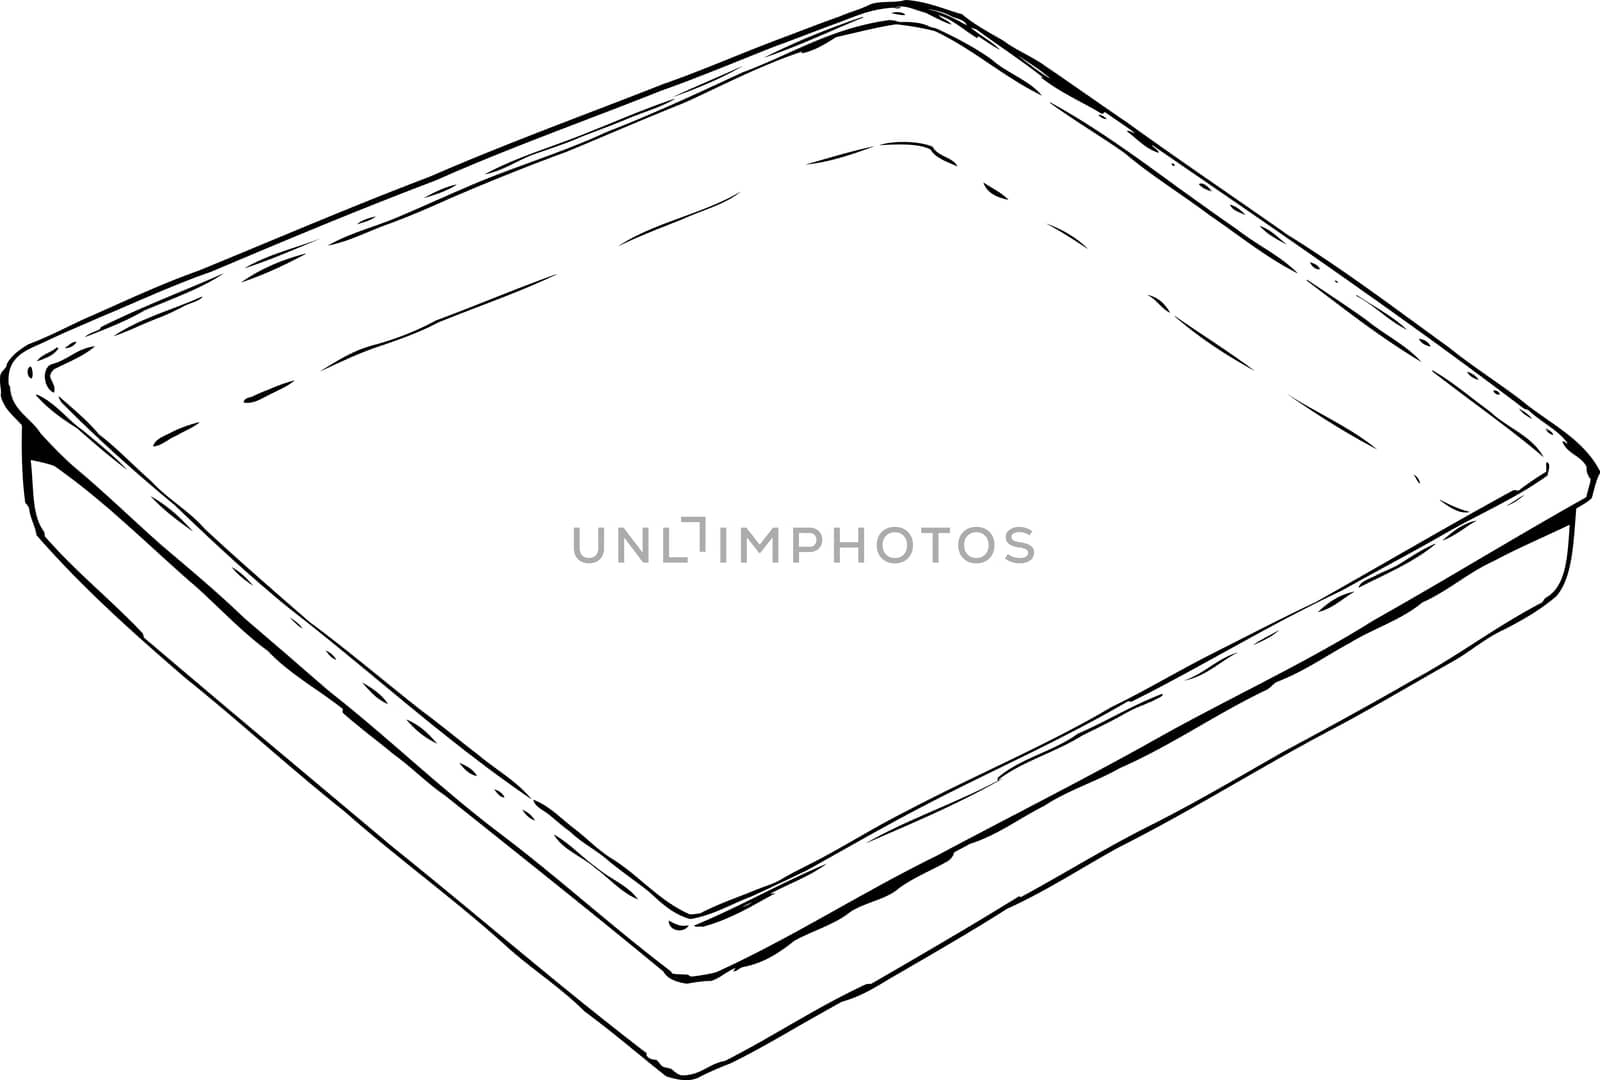 Empty tray illustration outline by TheBlackRhino